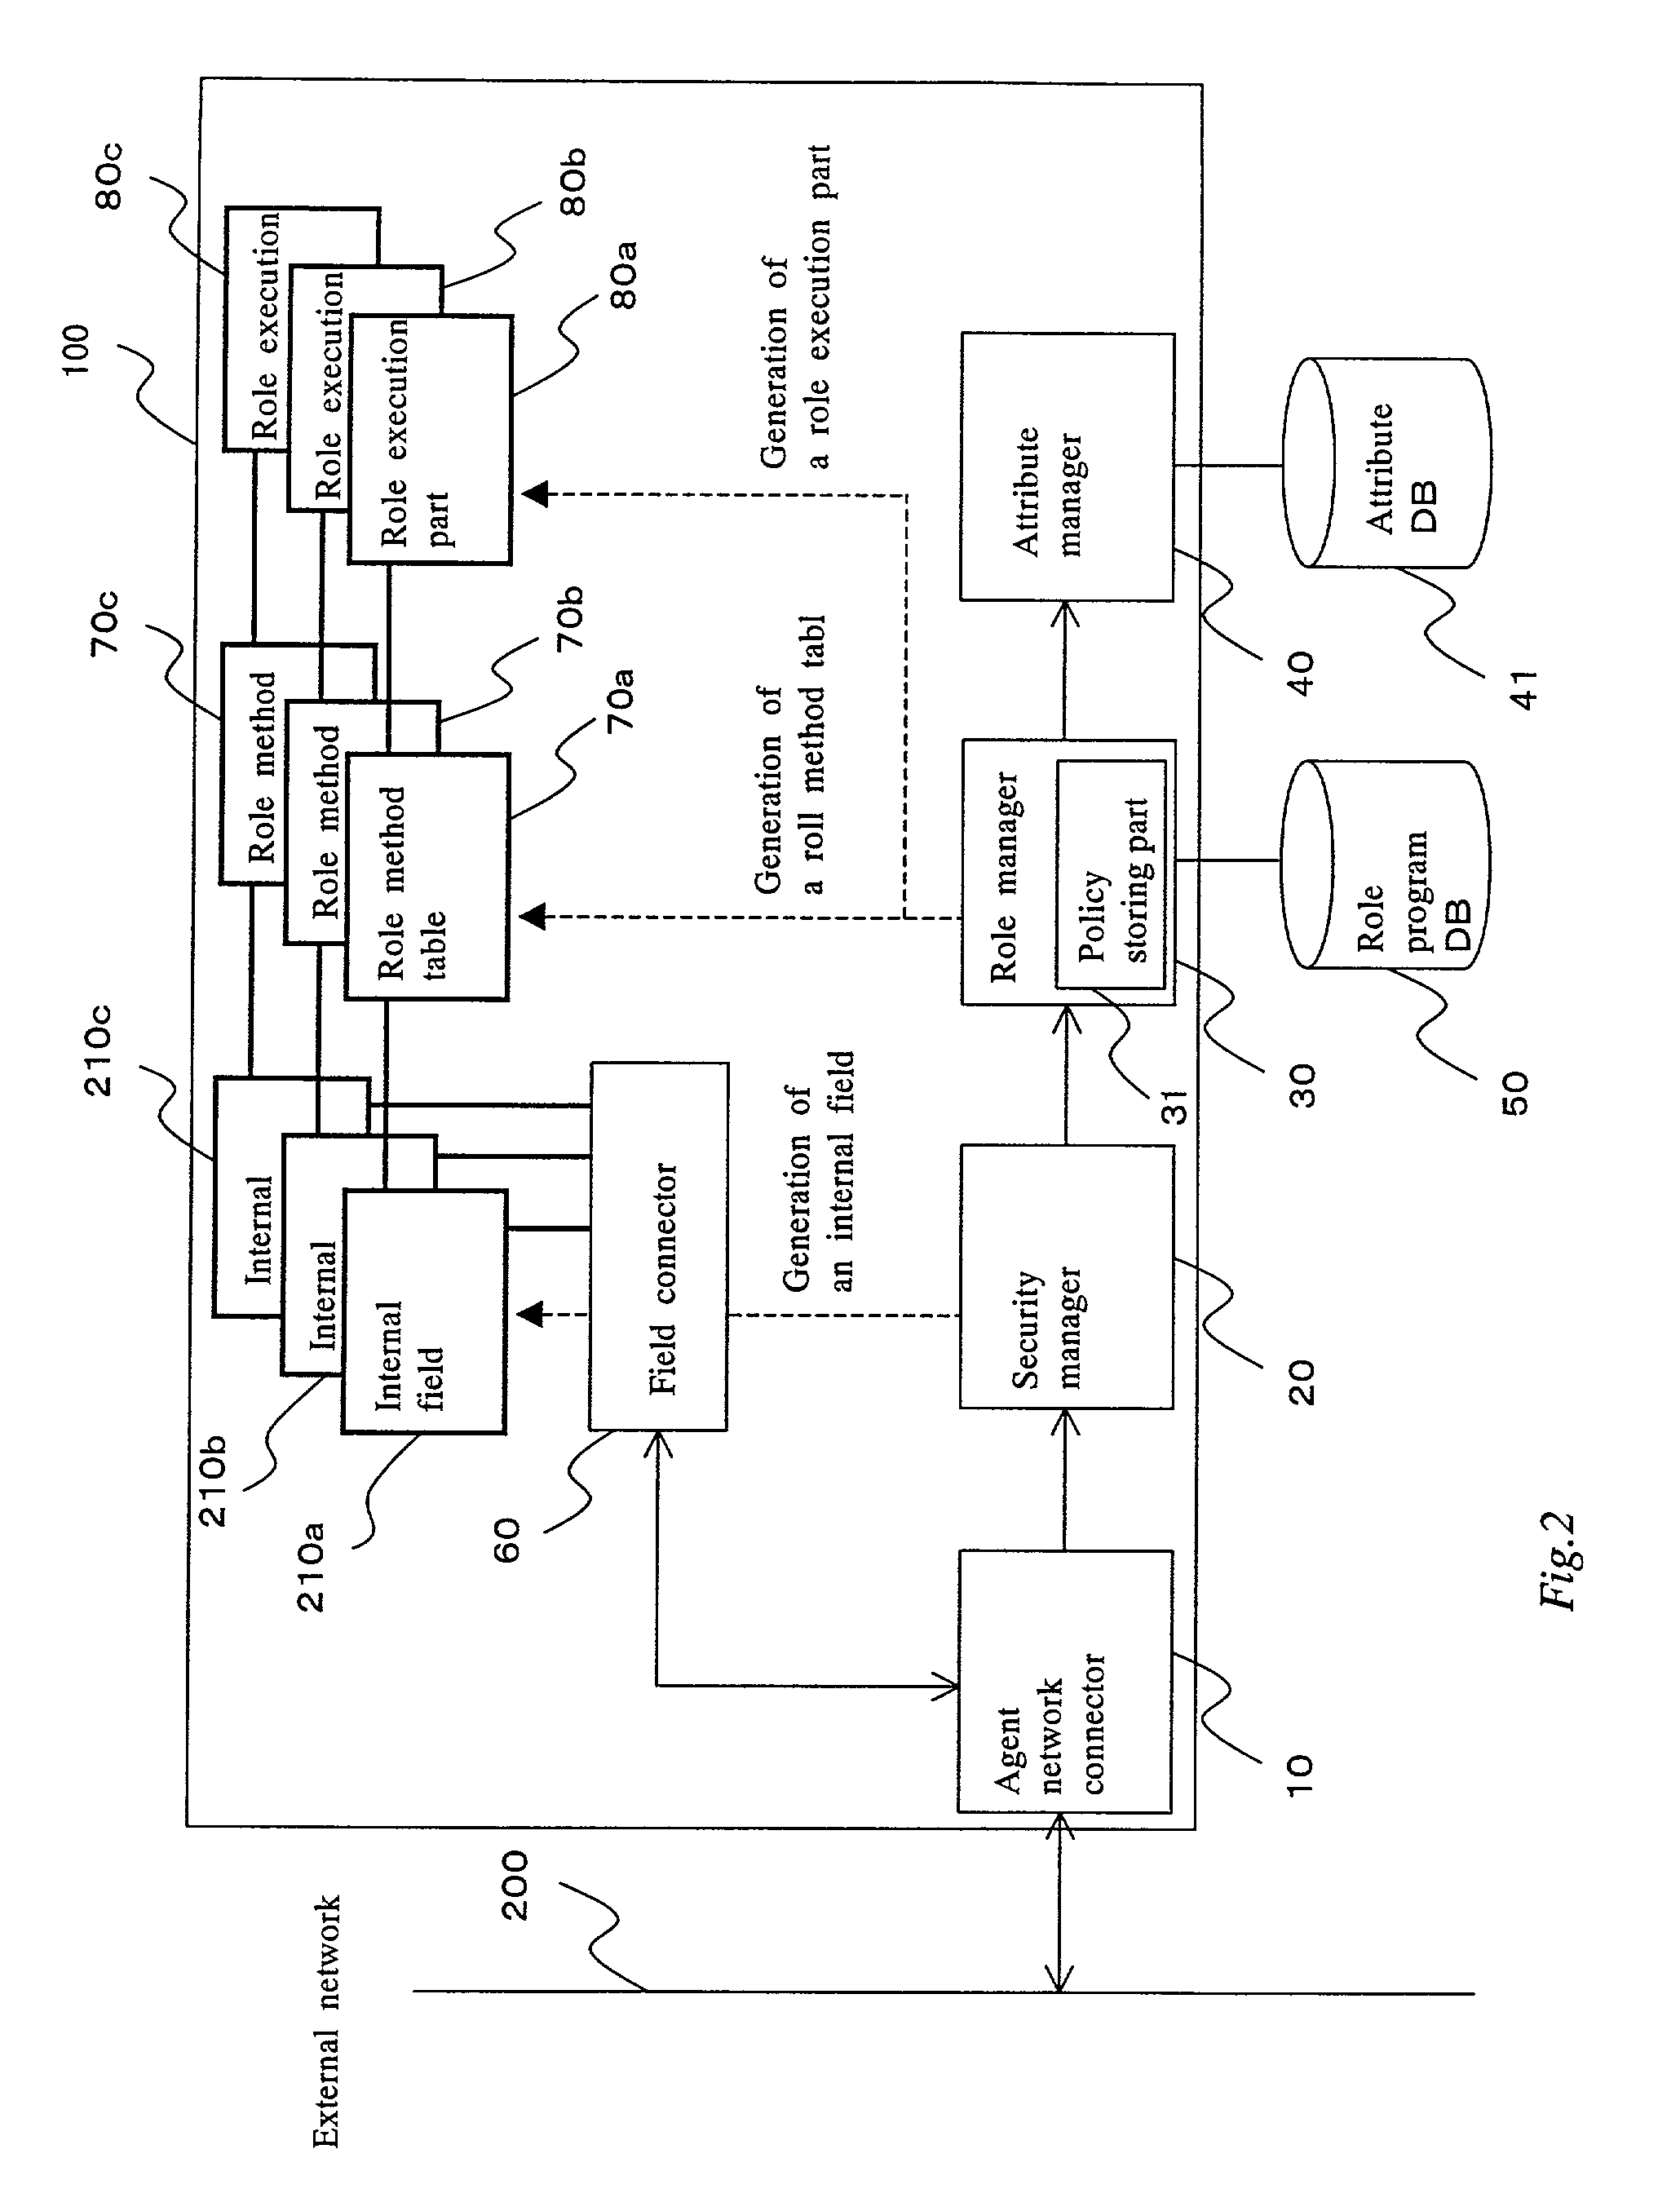 Virtual communication channel and virtual private community, and agent collaboration system and agent collaboration method for controlling the same